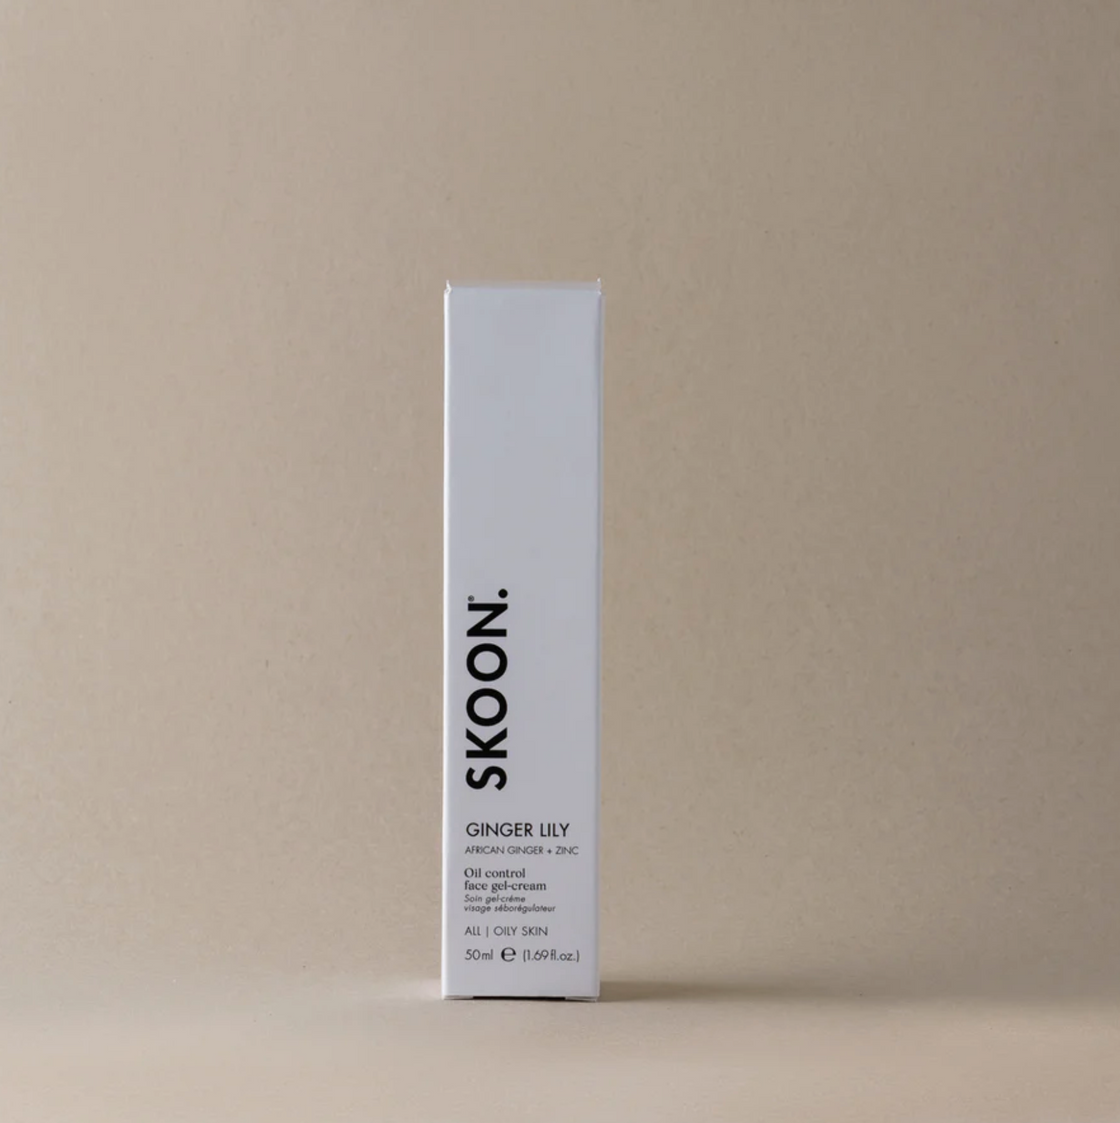 SKOON GINGER LILY Oil control face gel-cream